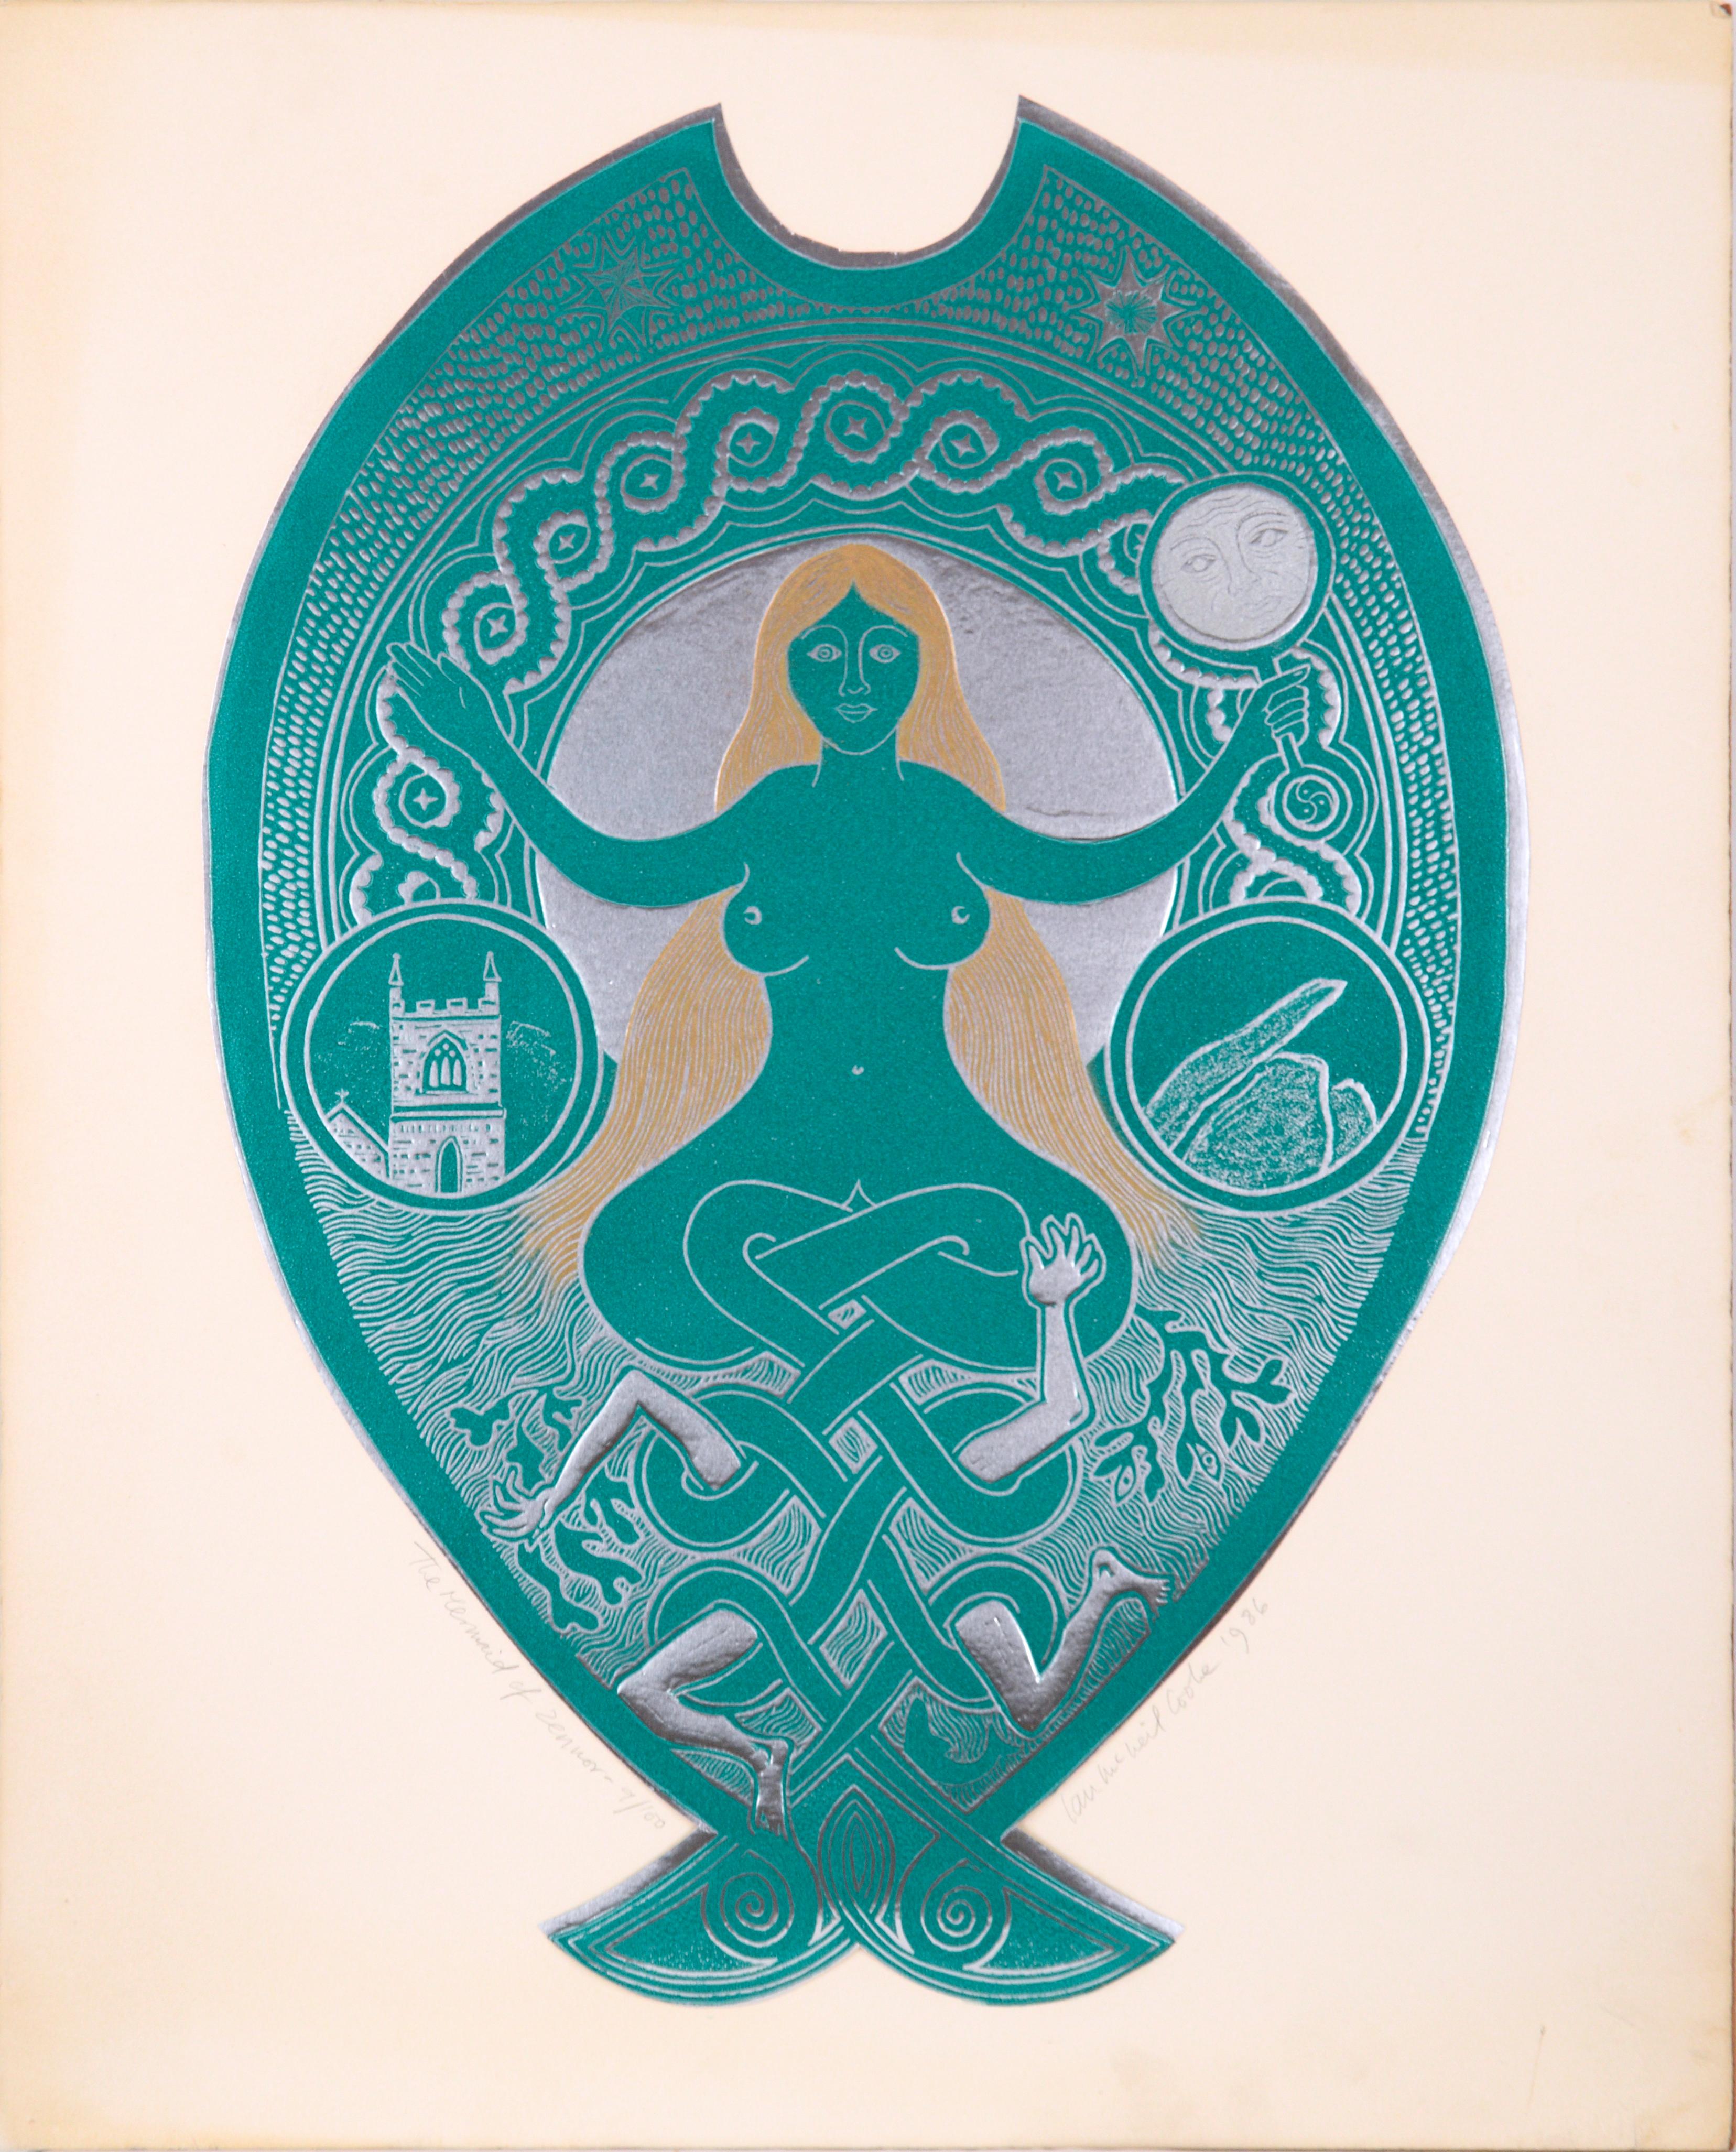 "The Mermaid of Zennor" - Psychedelic Visionary Metallic Print, 9/100